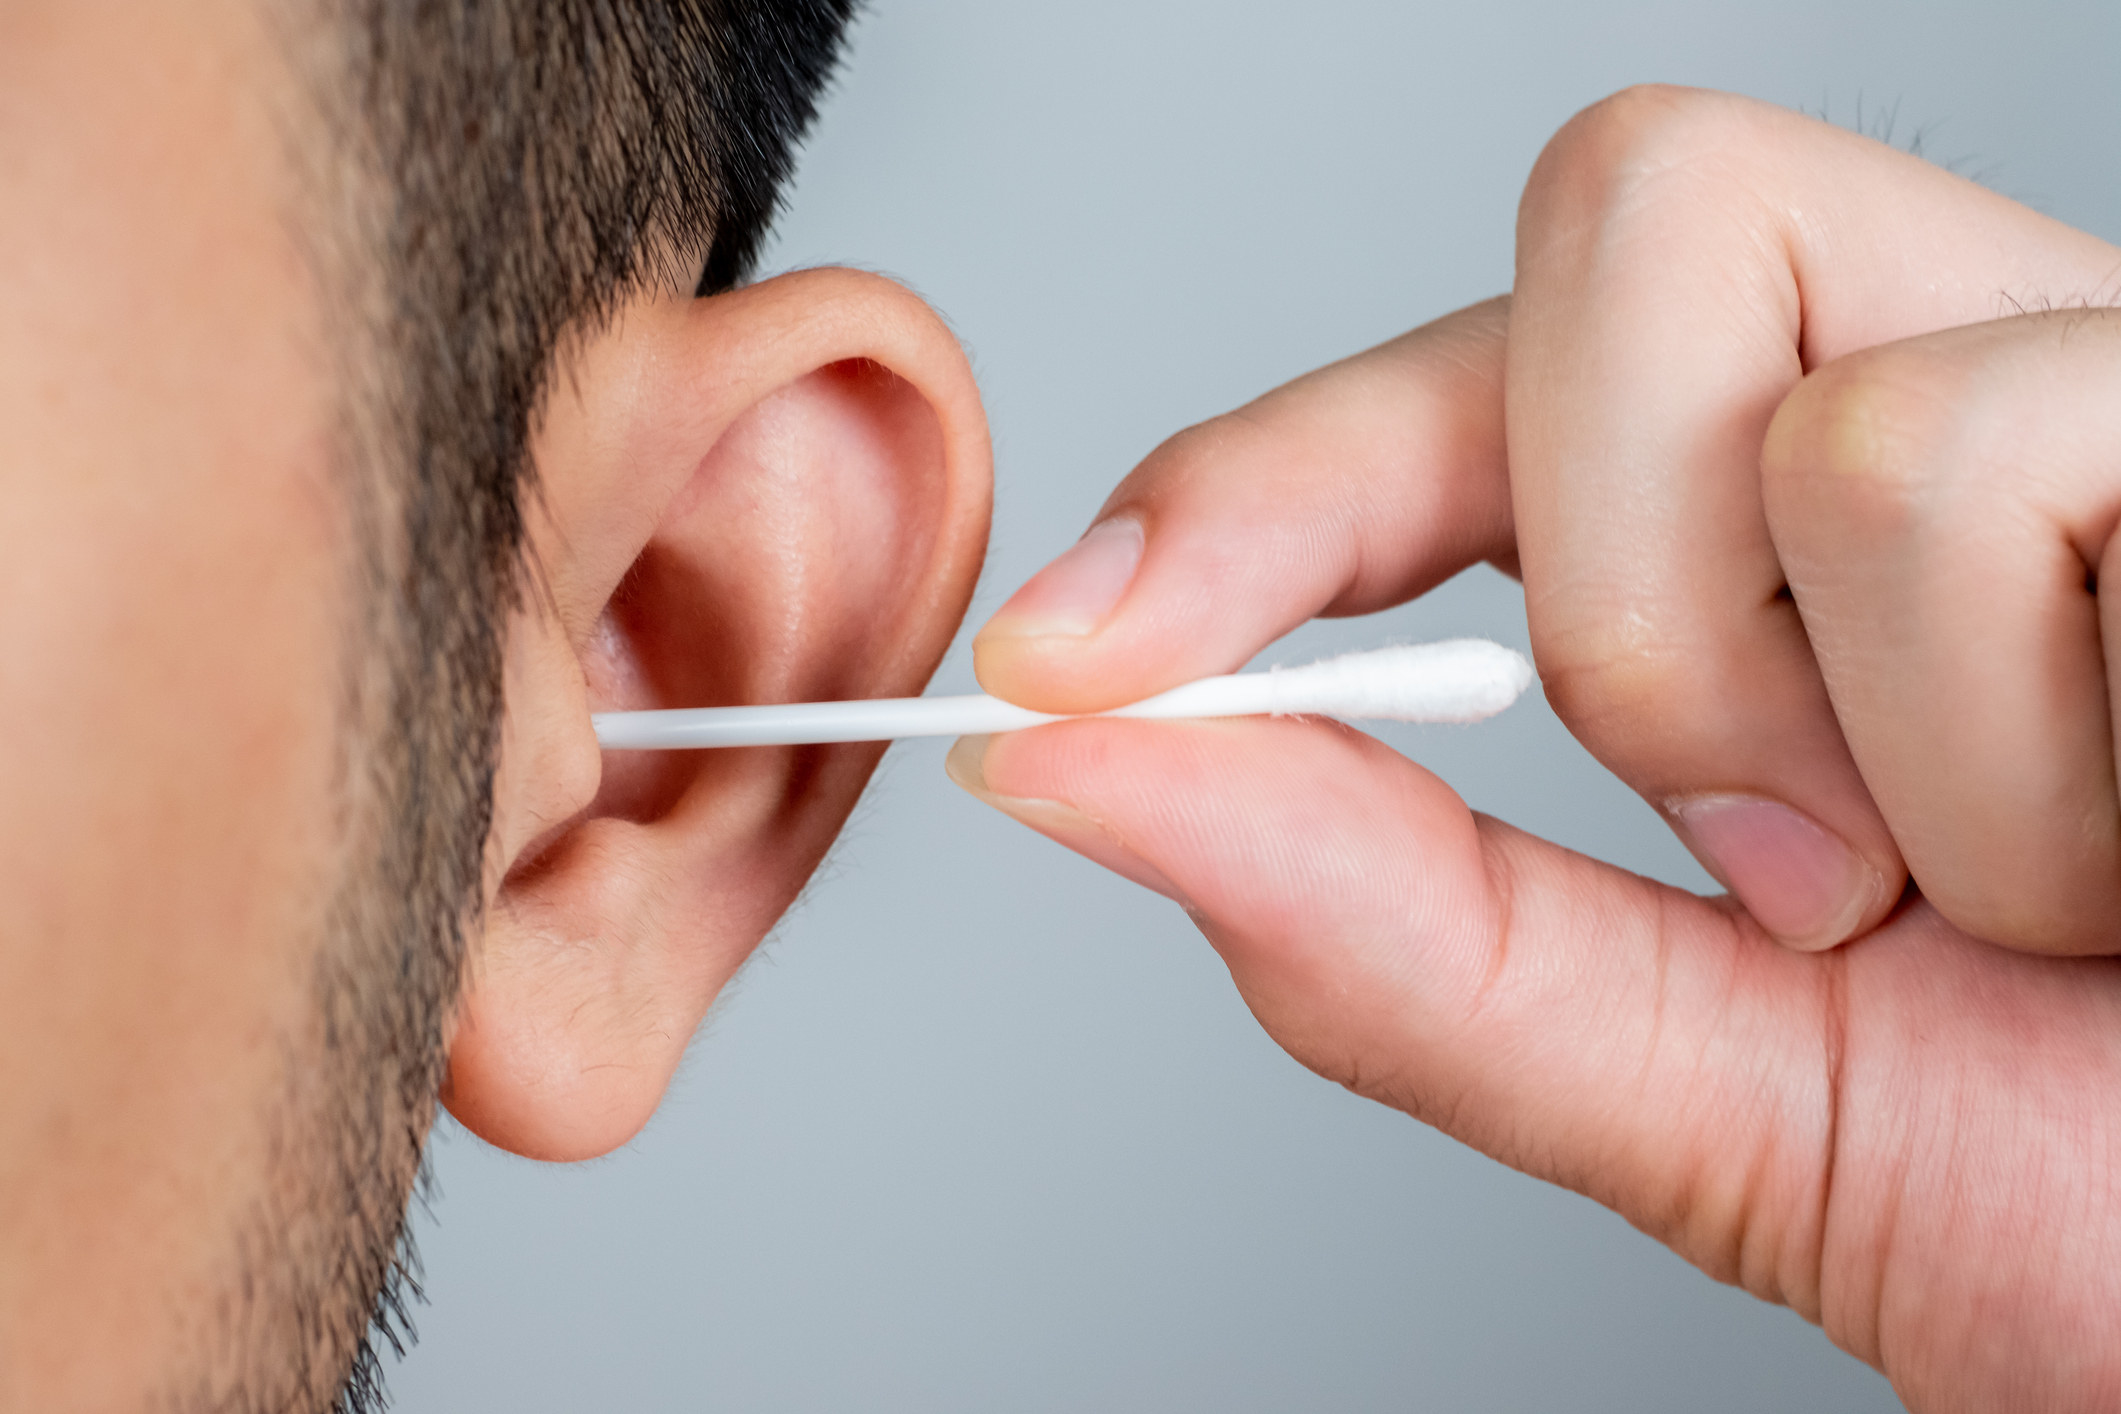 A guy sticking a Q-tip in his ear